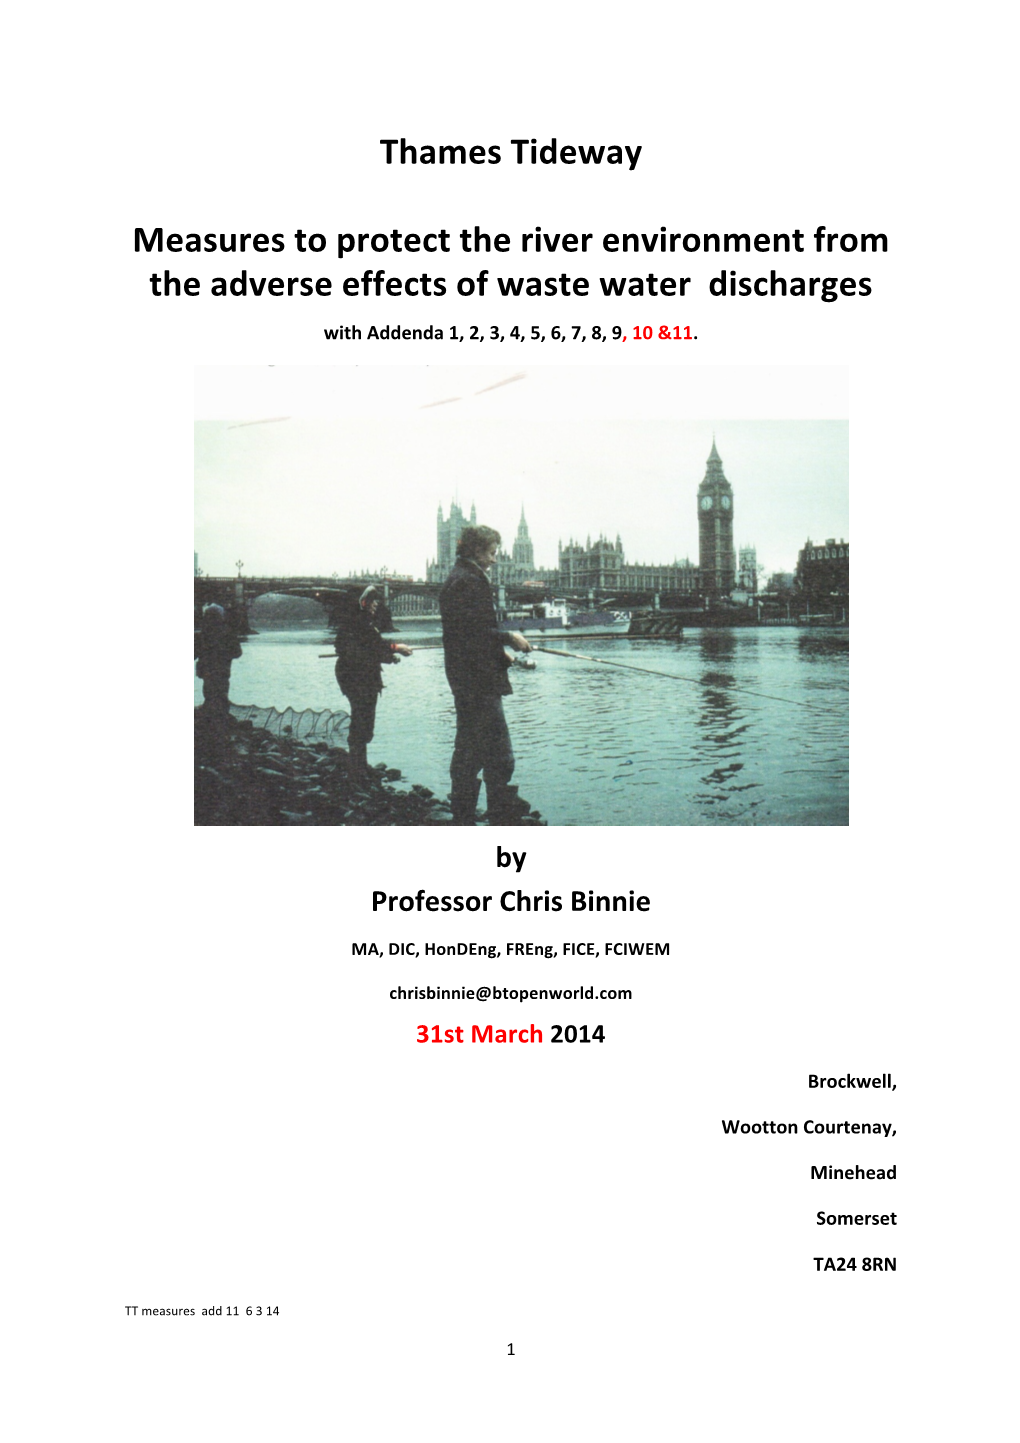 Thames Tideway Measures to Protect the River